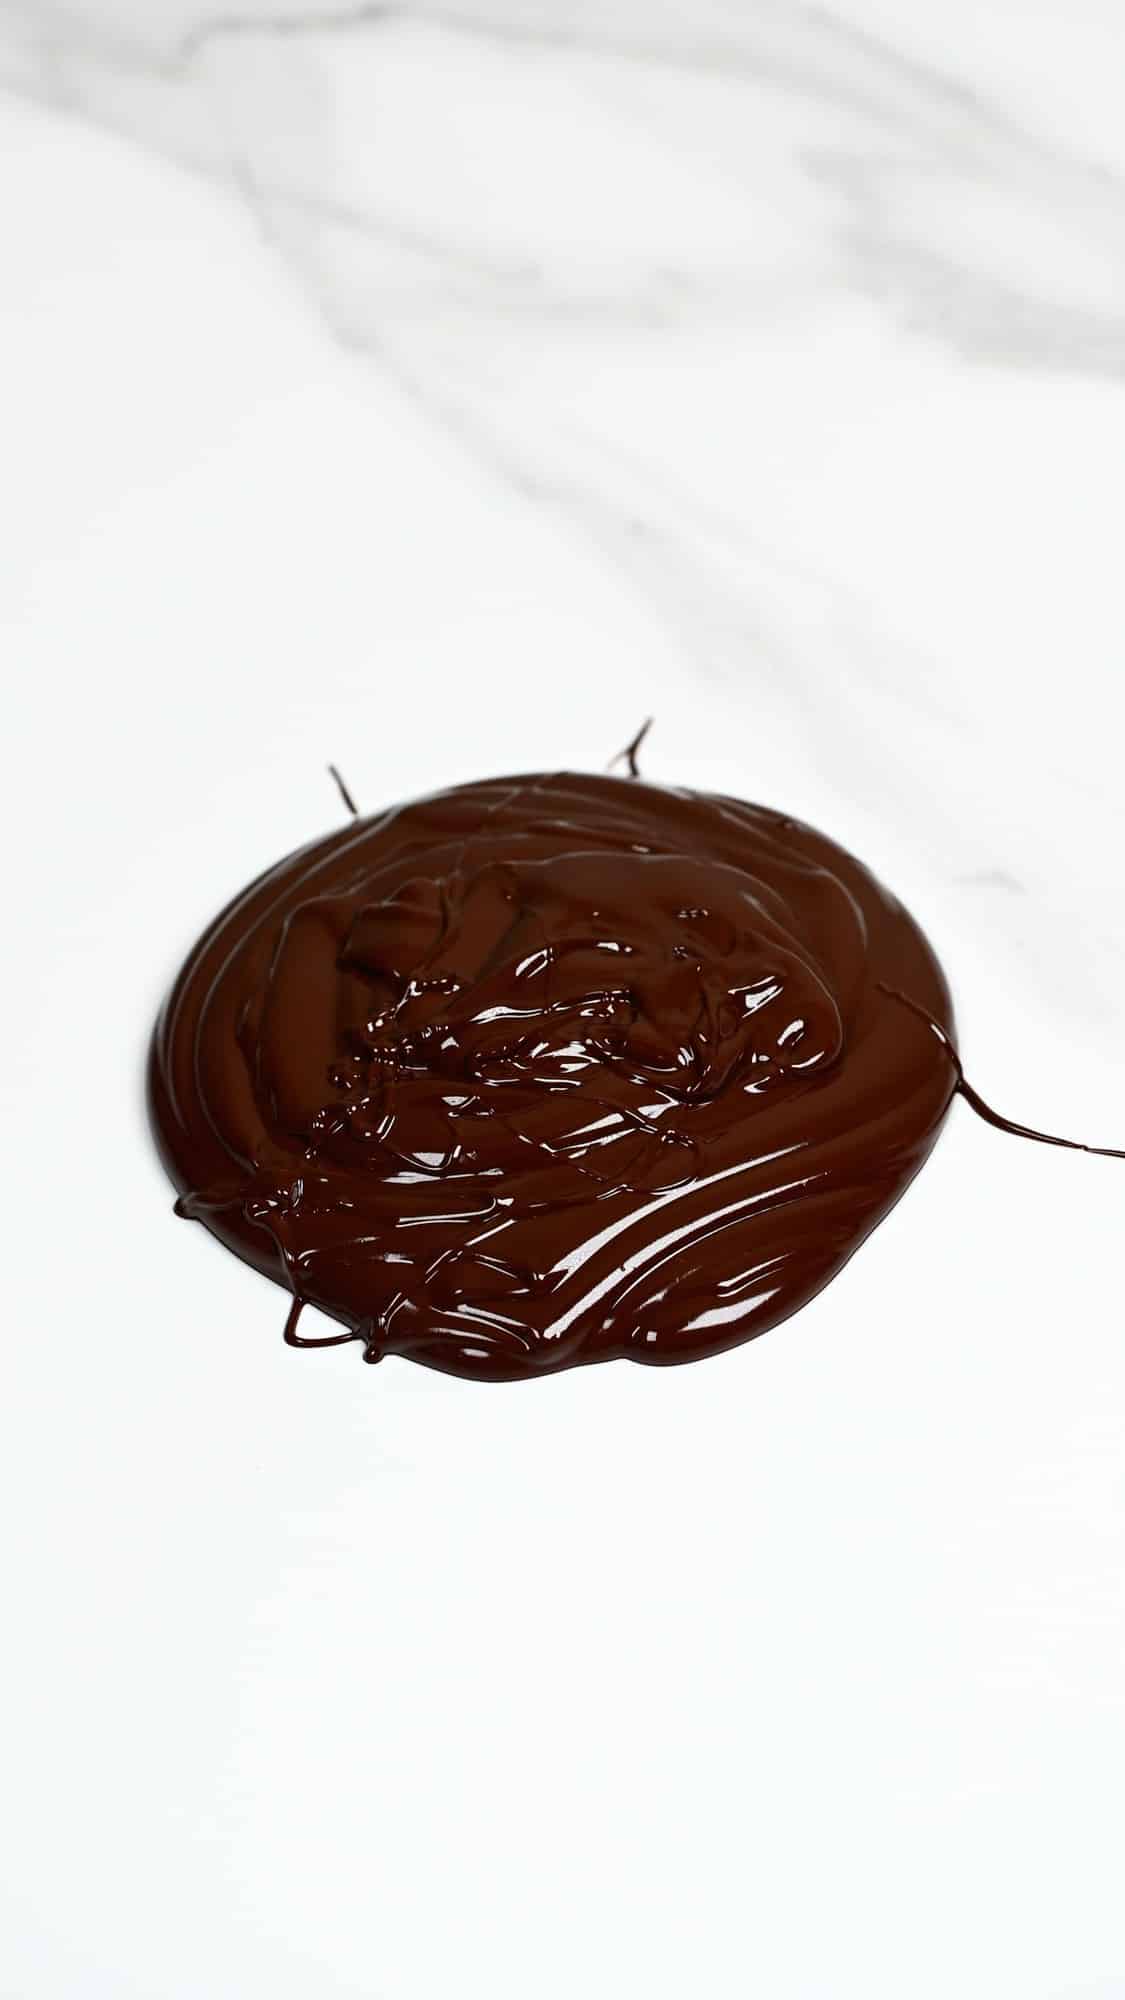 Melted chocolate on flat surface